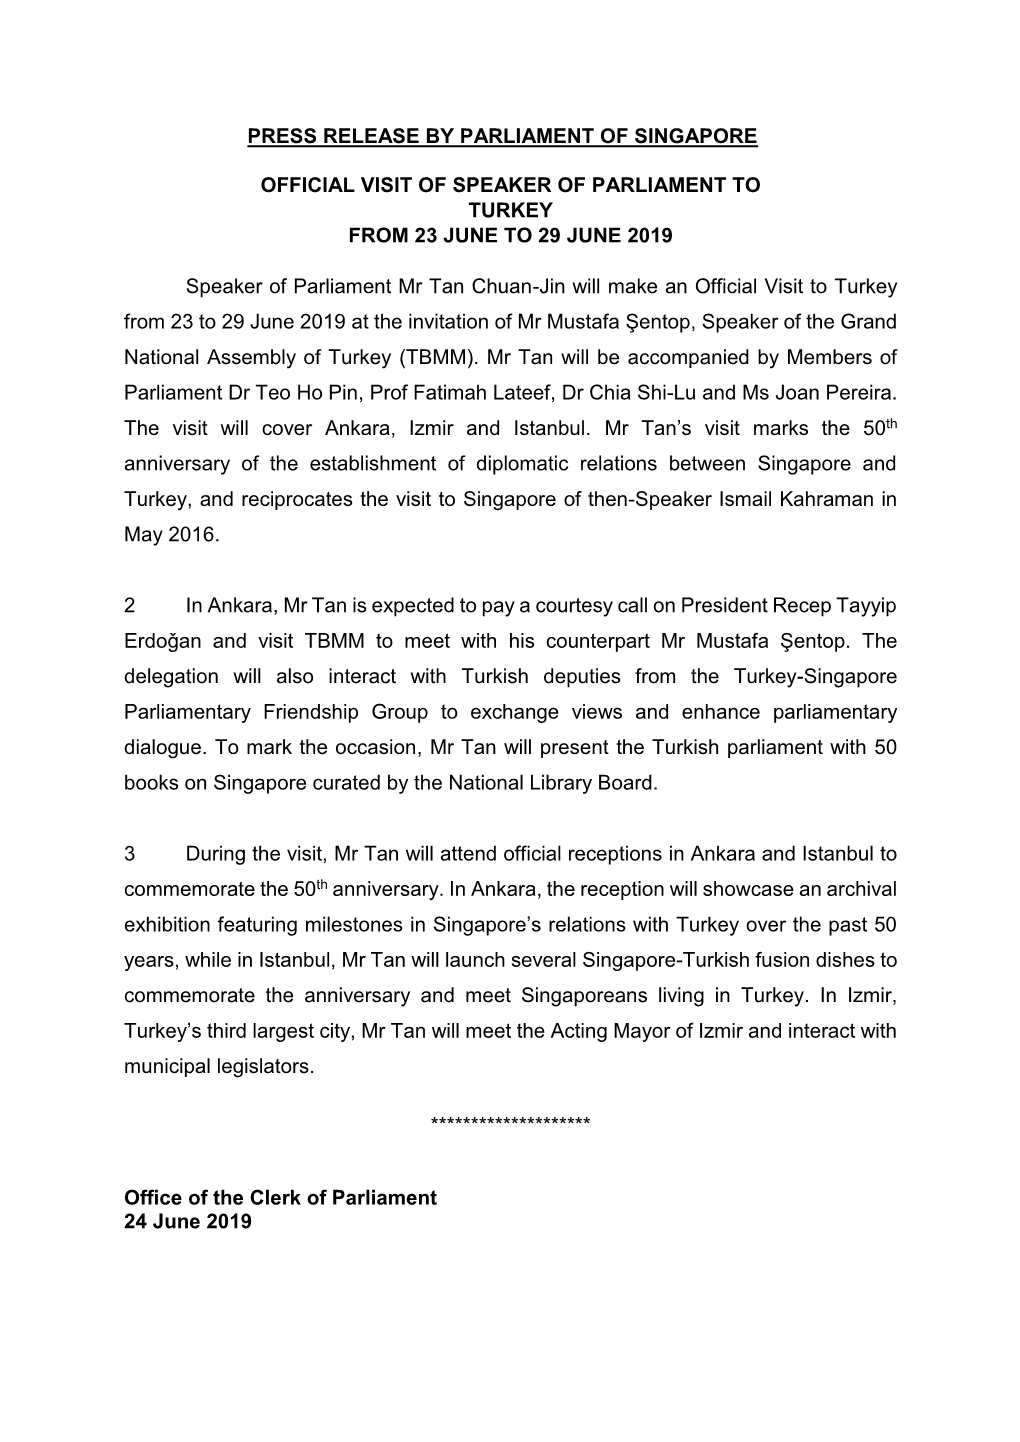 Press Release for Visit to Turkey by Speaker